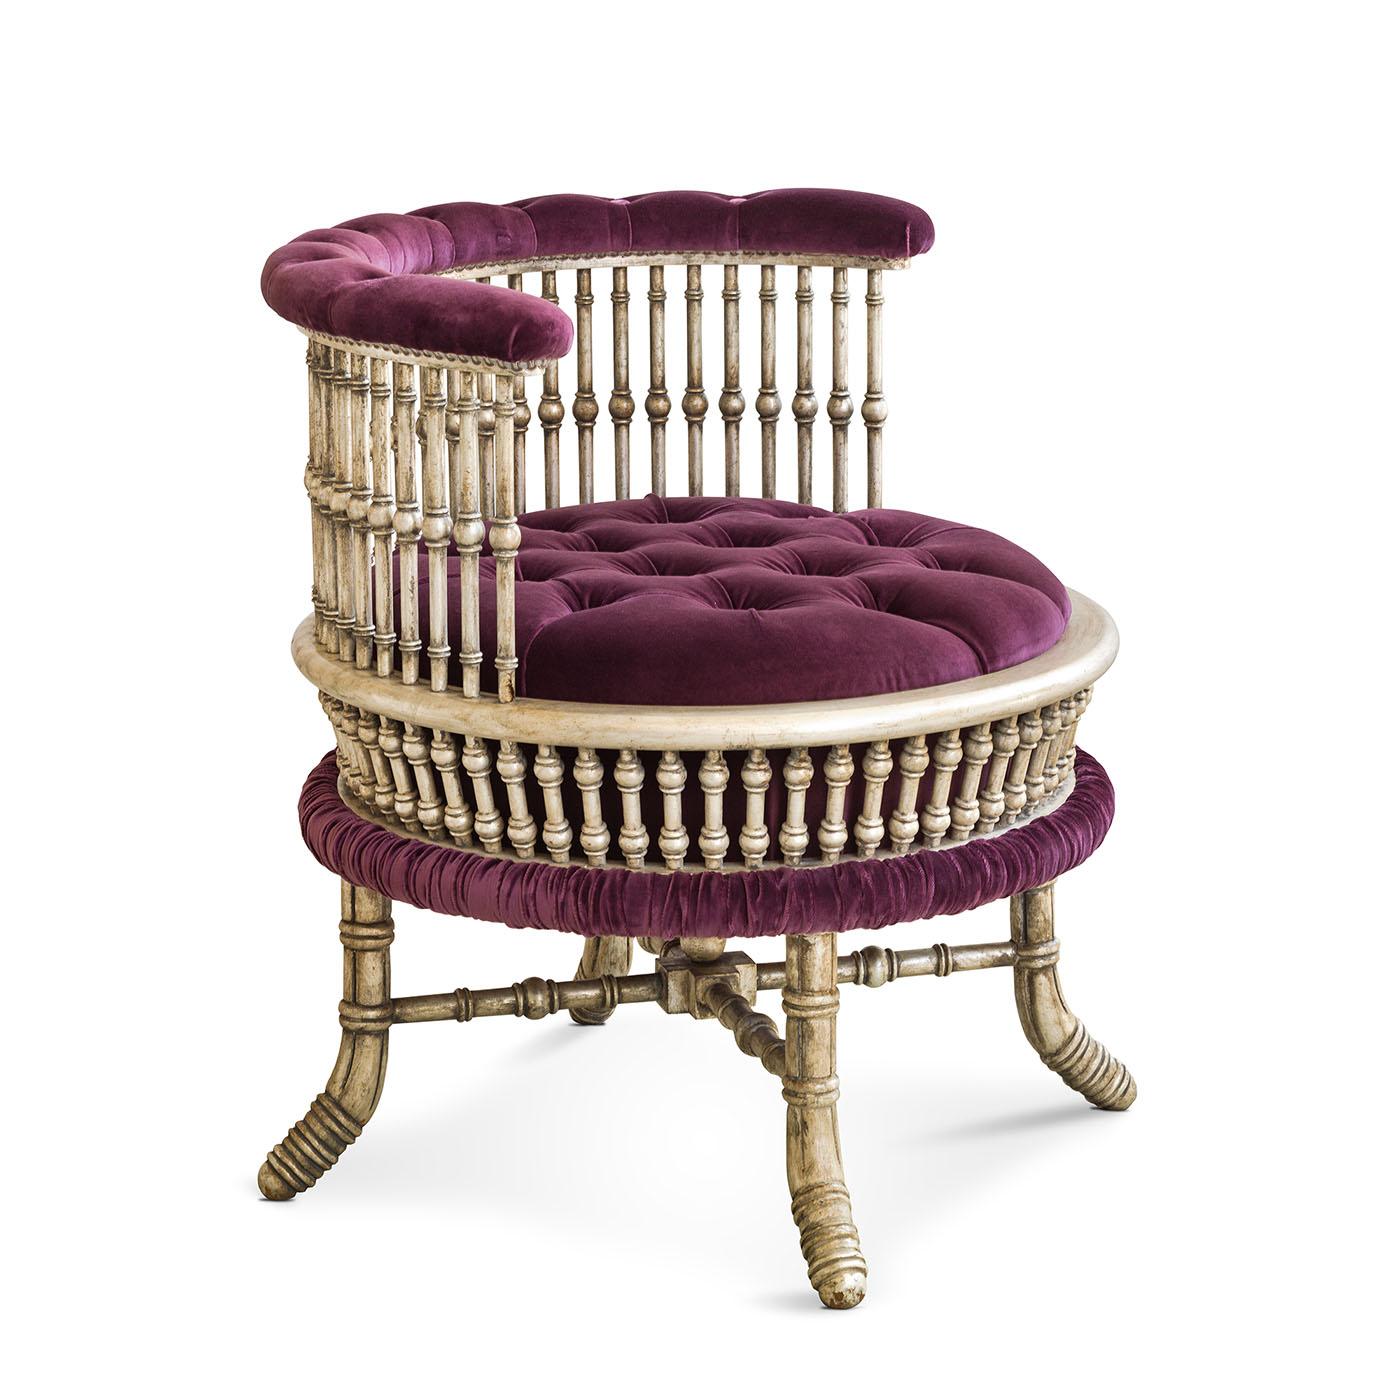 The Mahalia armchair's round shape is adorn by cotton velvet upholstery and exquisite capitonnè detailing. This armchair exudes timeless elegance, combining supreme comfort with a captivating design that adds a touch of sophistication to any